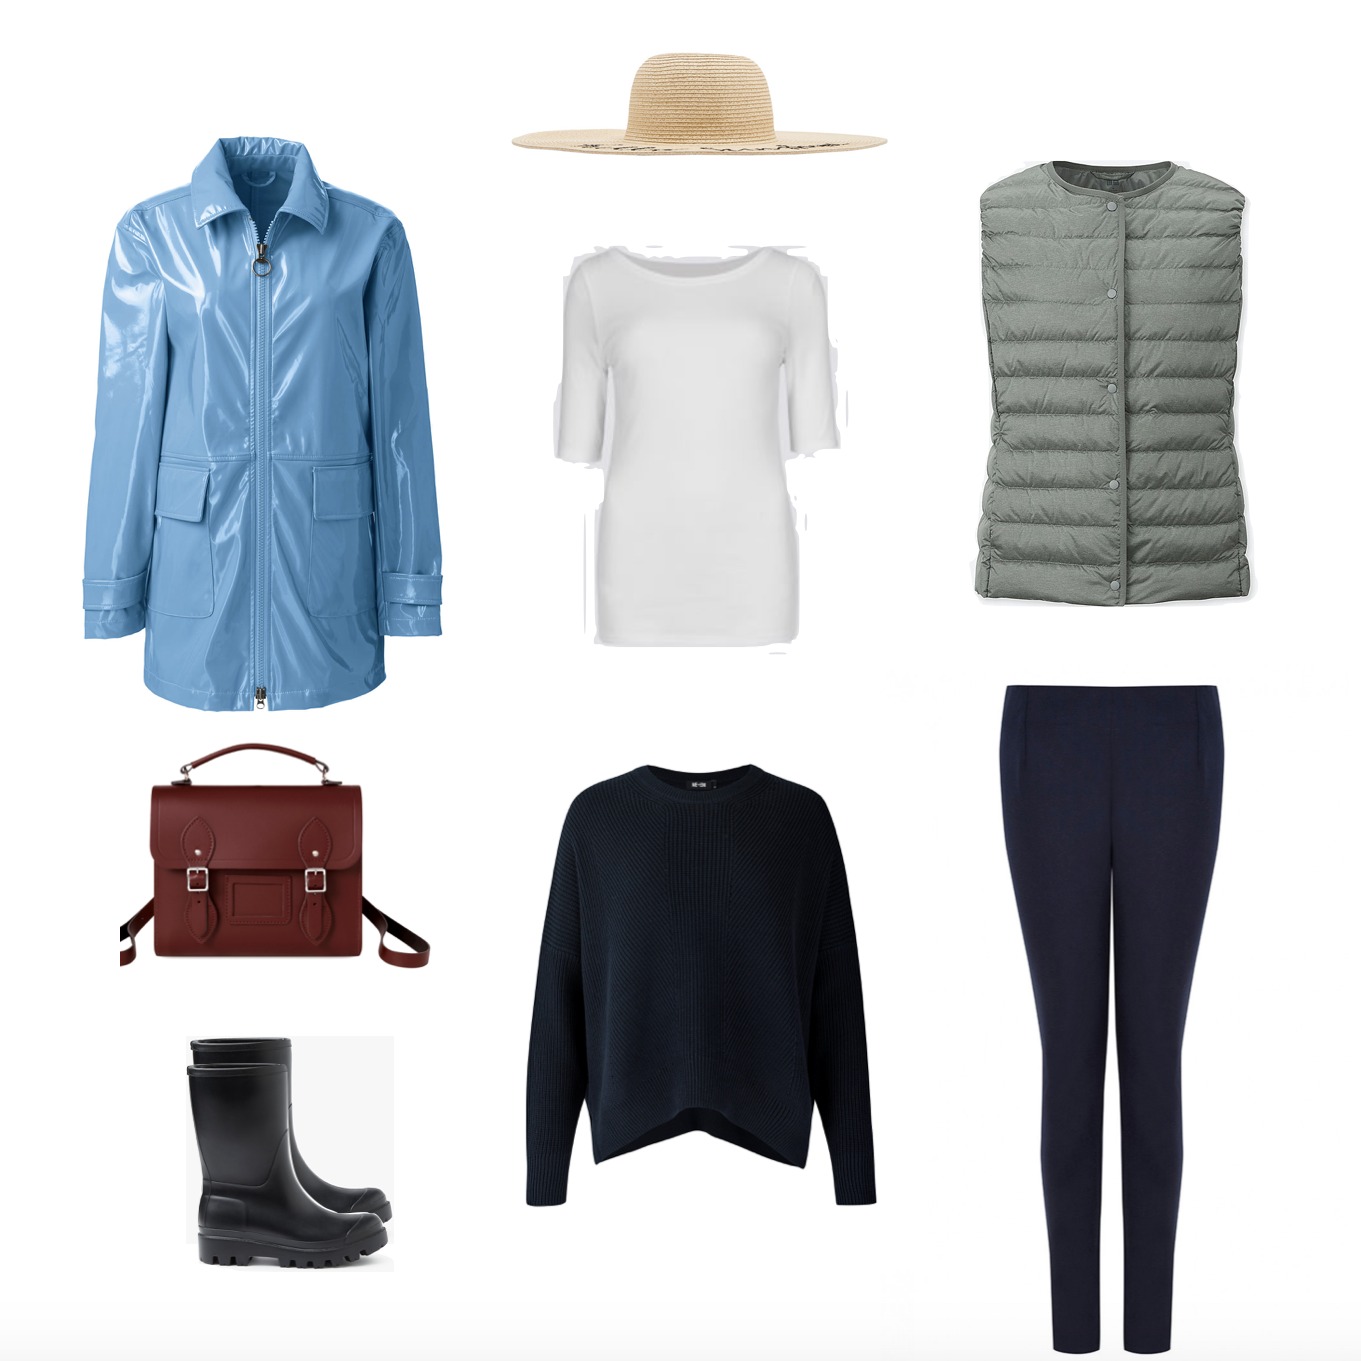 Capsule wardrobe for visit to Wales